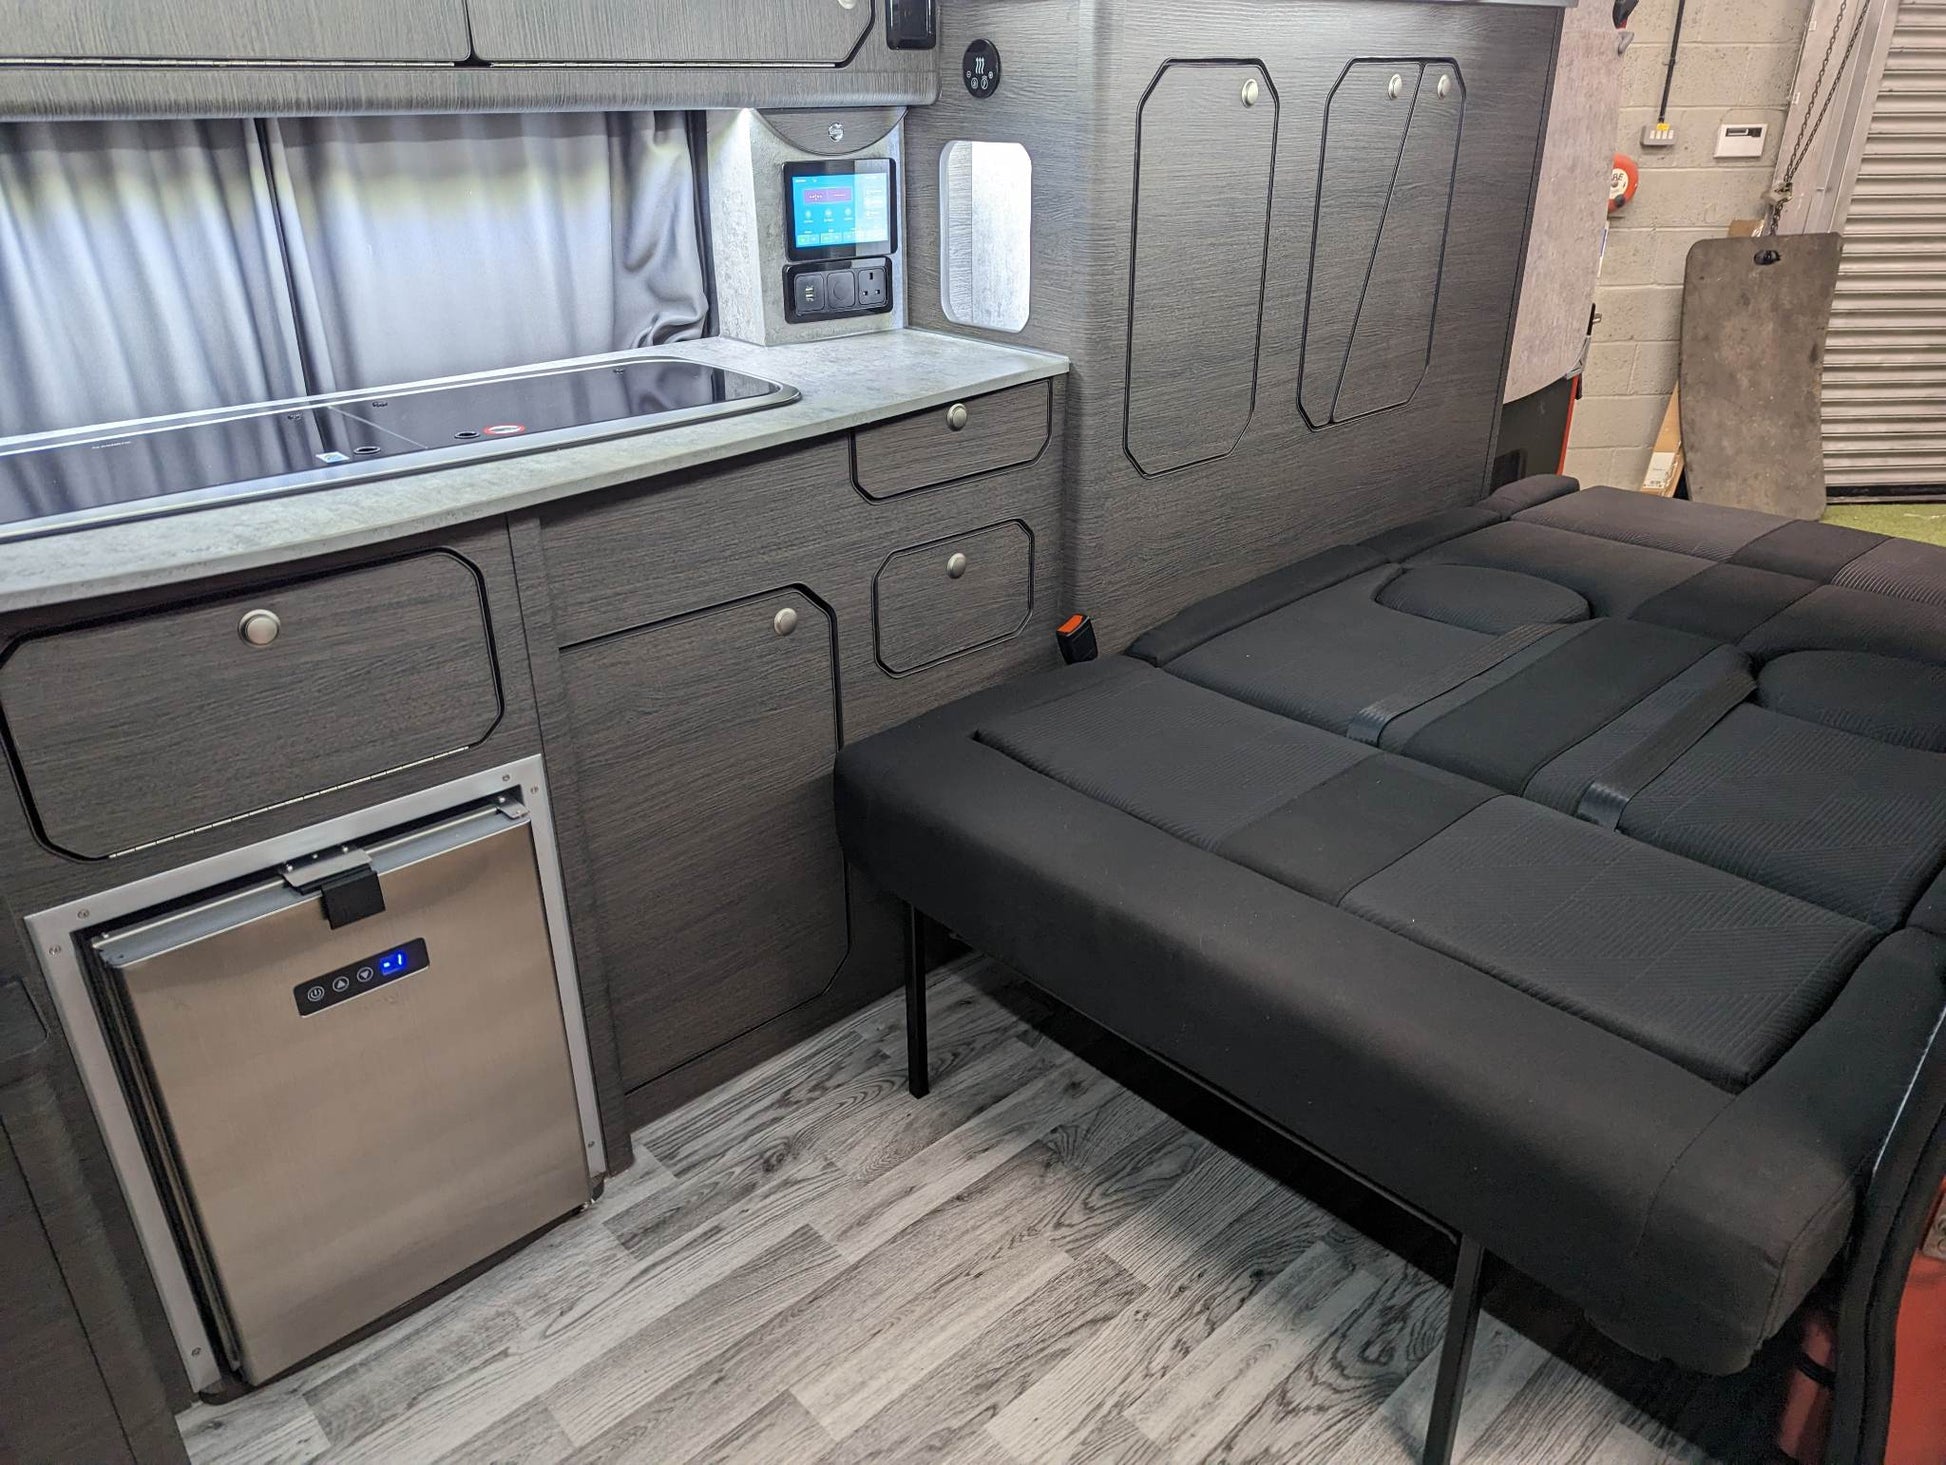 The Shelsley Solo or Duo Camper Van Conversion for the Vauxhall Vivaro, Renault Trafic, Nissan NV300 and Fiat Talento - cccampers.myshopify.com